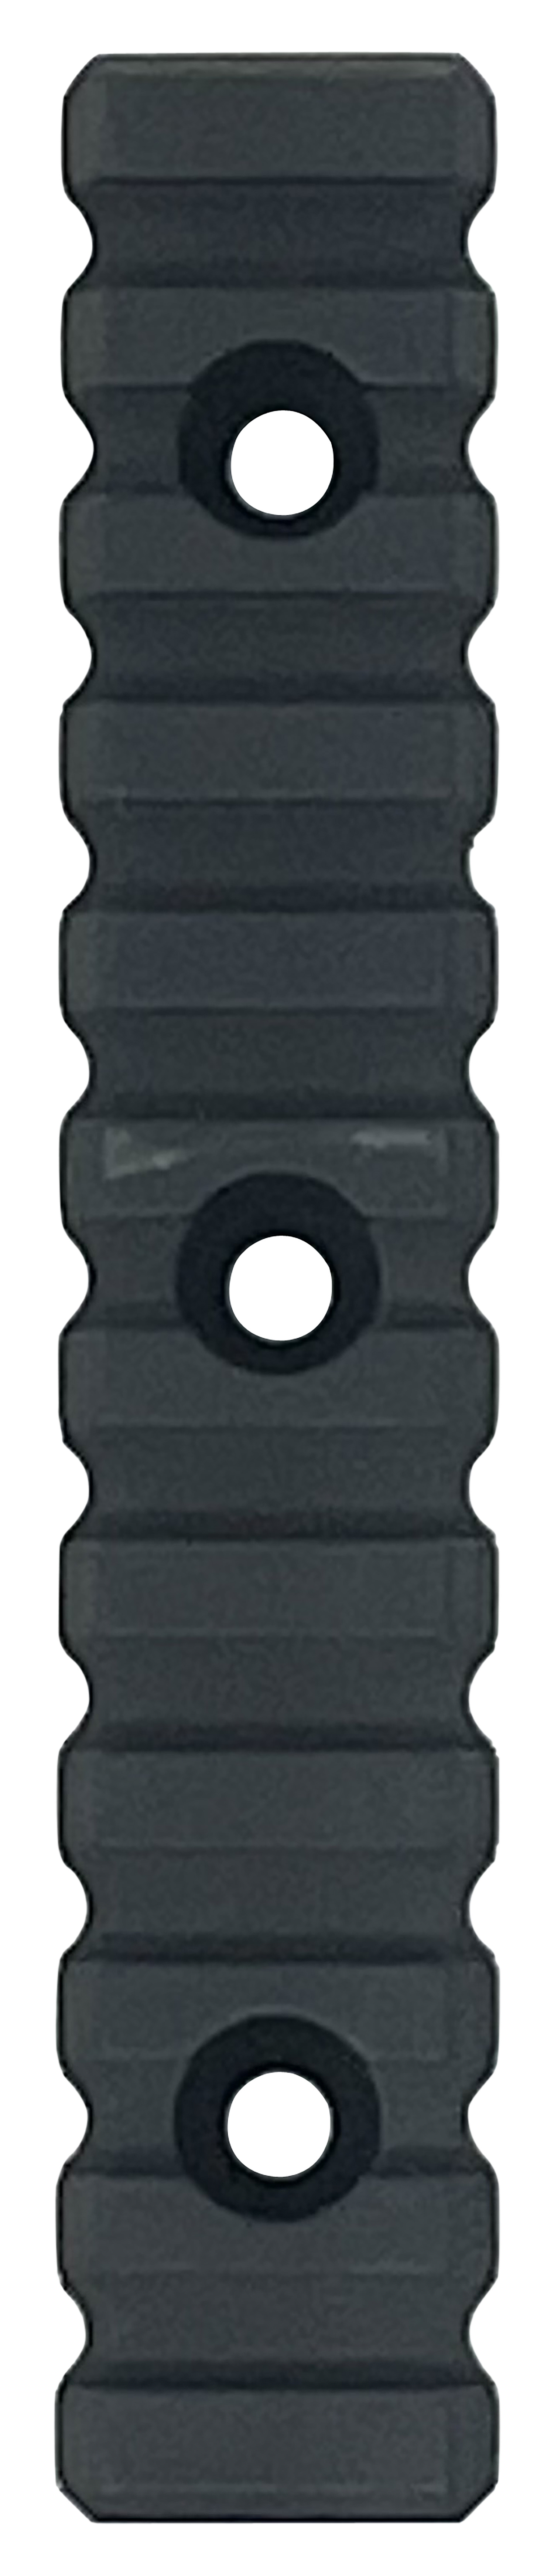 Bowden Tactical J1311544 AR*Chitect Picatinny Rail made of Aluminum with Black Hardcoat Anodized Finish, Long Style & M-LOK Mount Type for AR-15